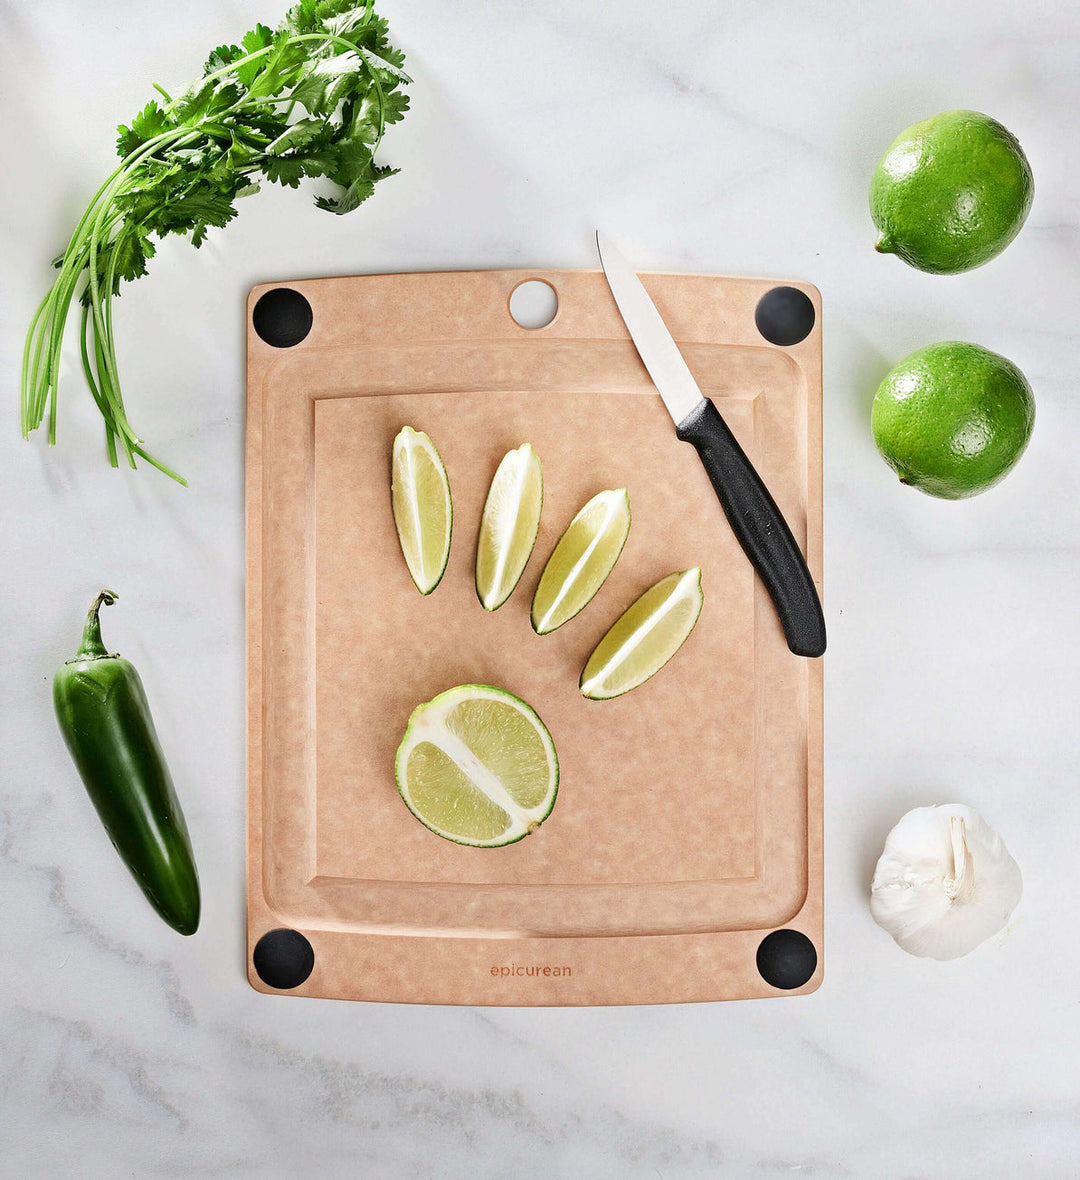 Epicurean Cutting Board All-in-One Series - Merry Piglets